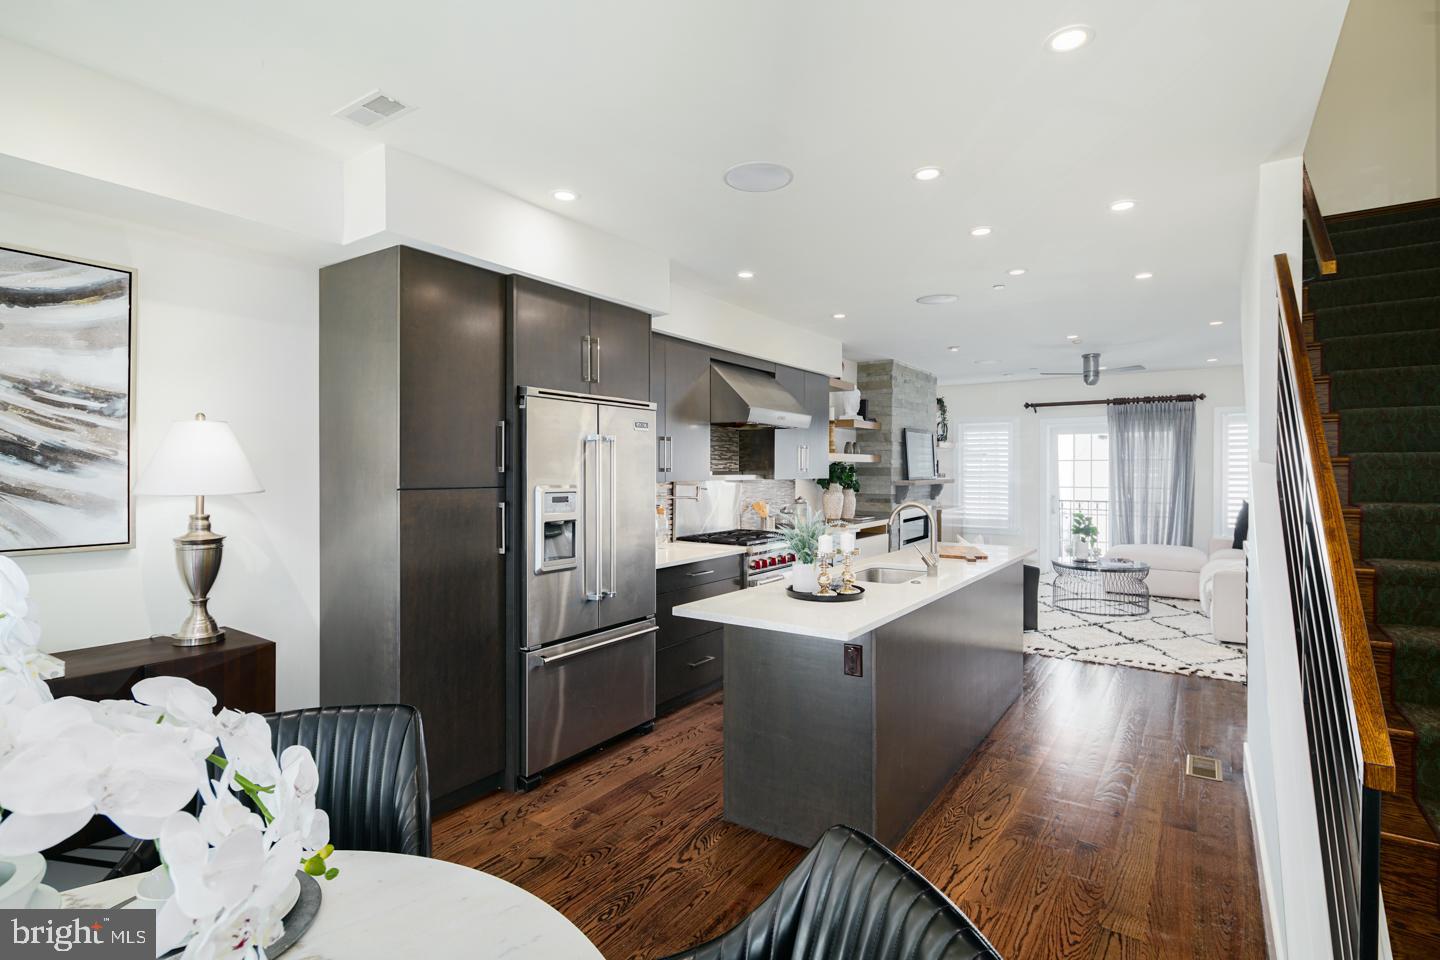 a kitchen with stainless steel appliances a sink a wooden floor and a view of living room